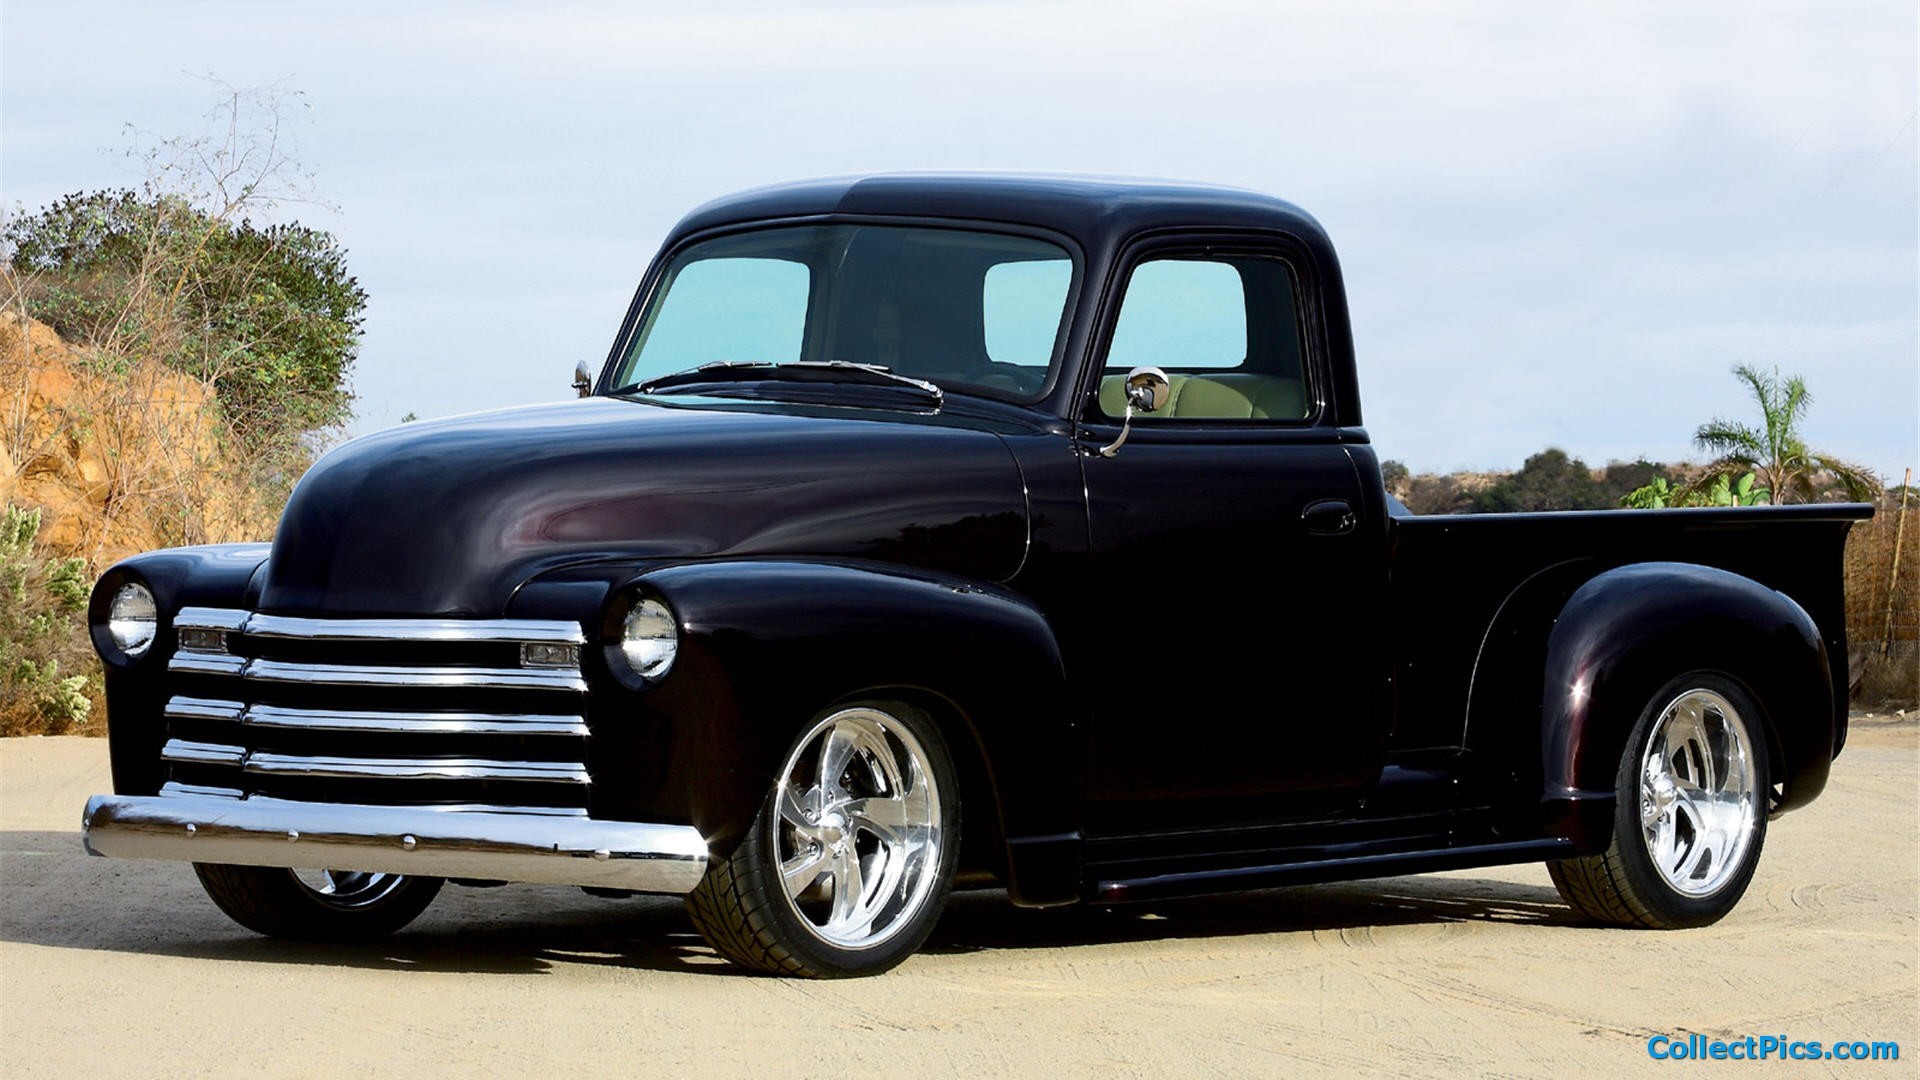 1920x1080 Chevy Truck Wallpapers, Creative Chevy Truck Wallpapers - #WP .